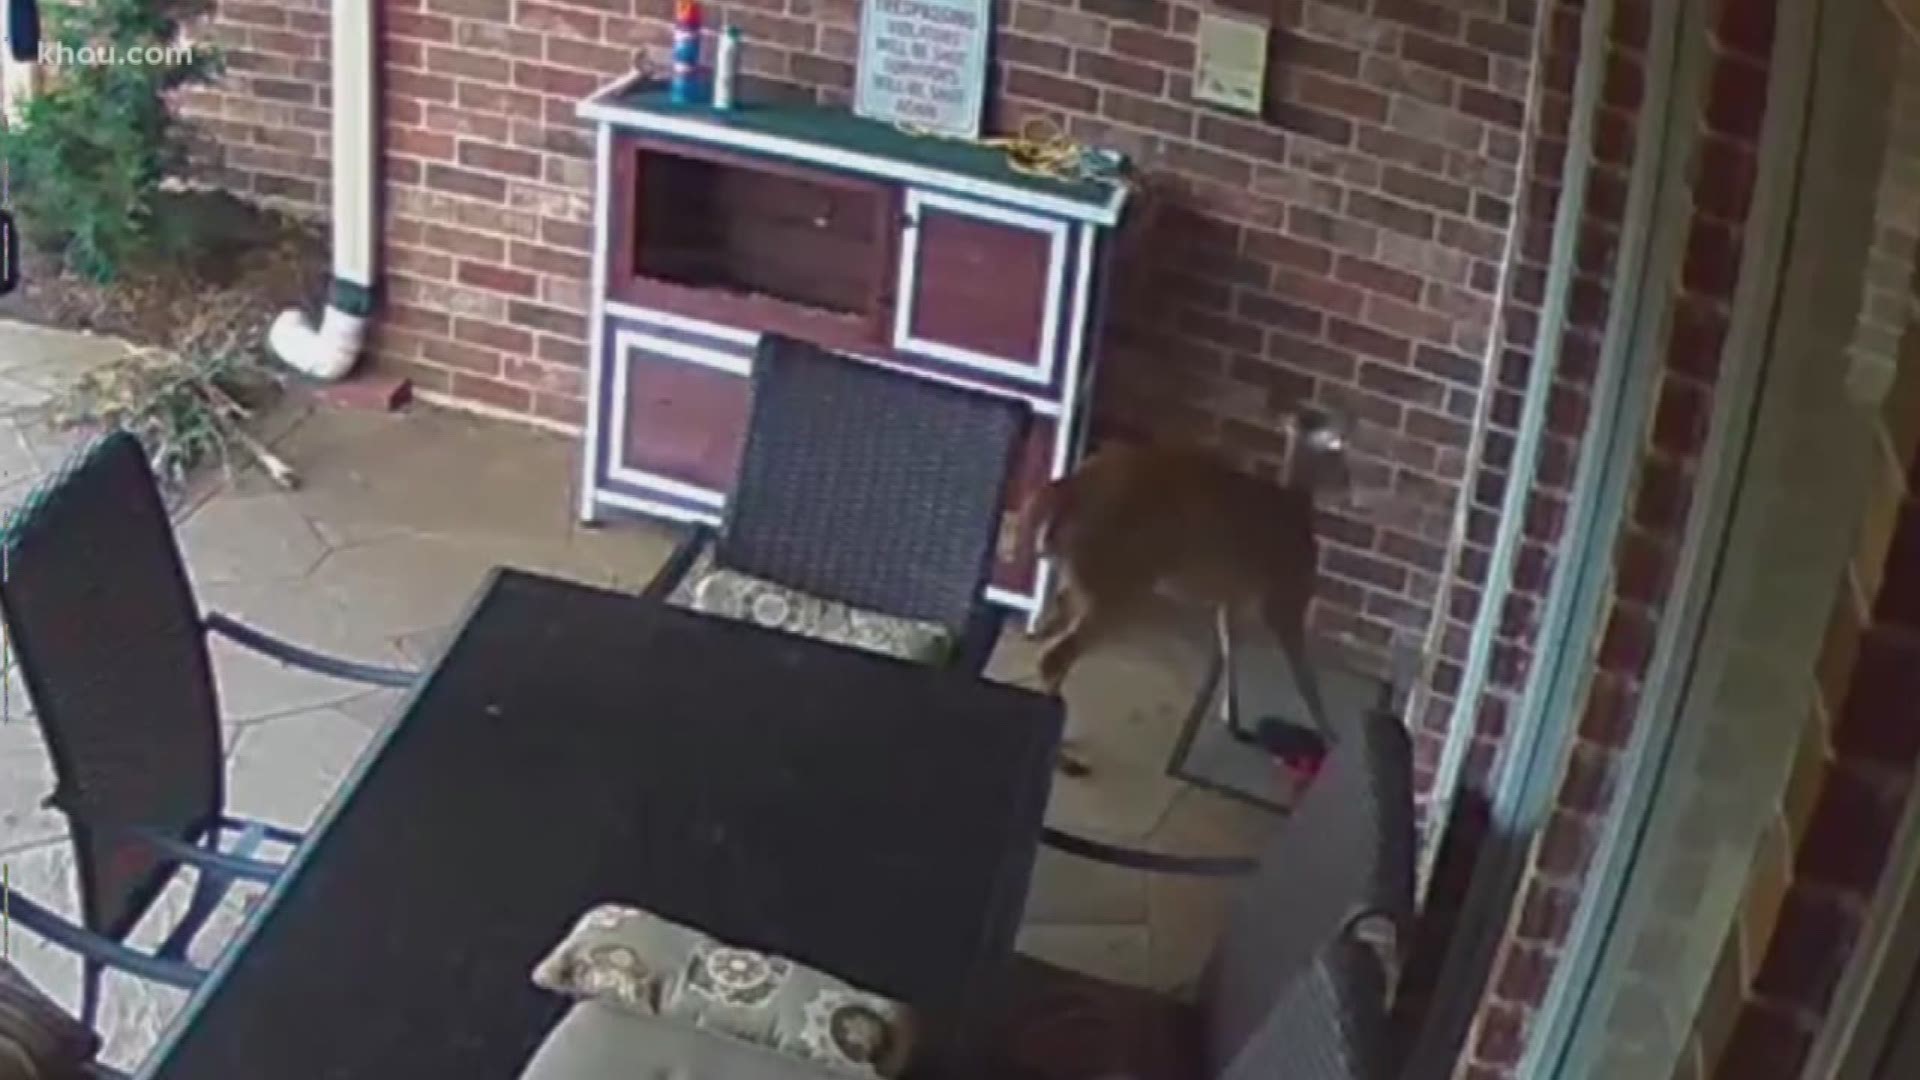 A video of the wild encounter was captured by Houston Police earlier this week, when they responded to a furry intruder alert.